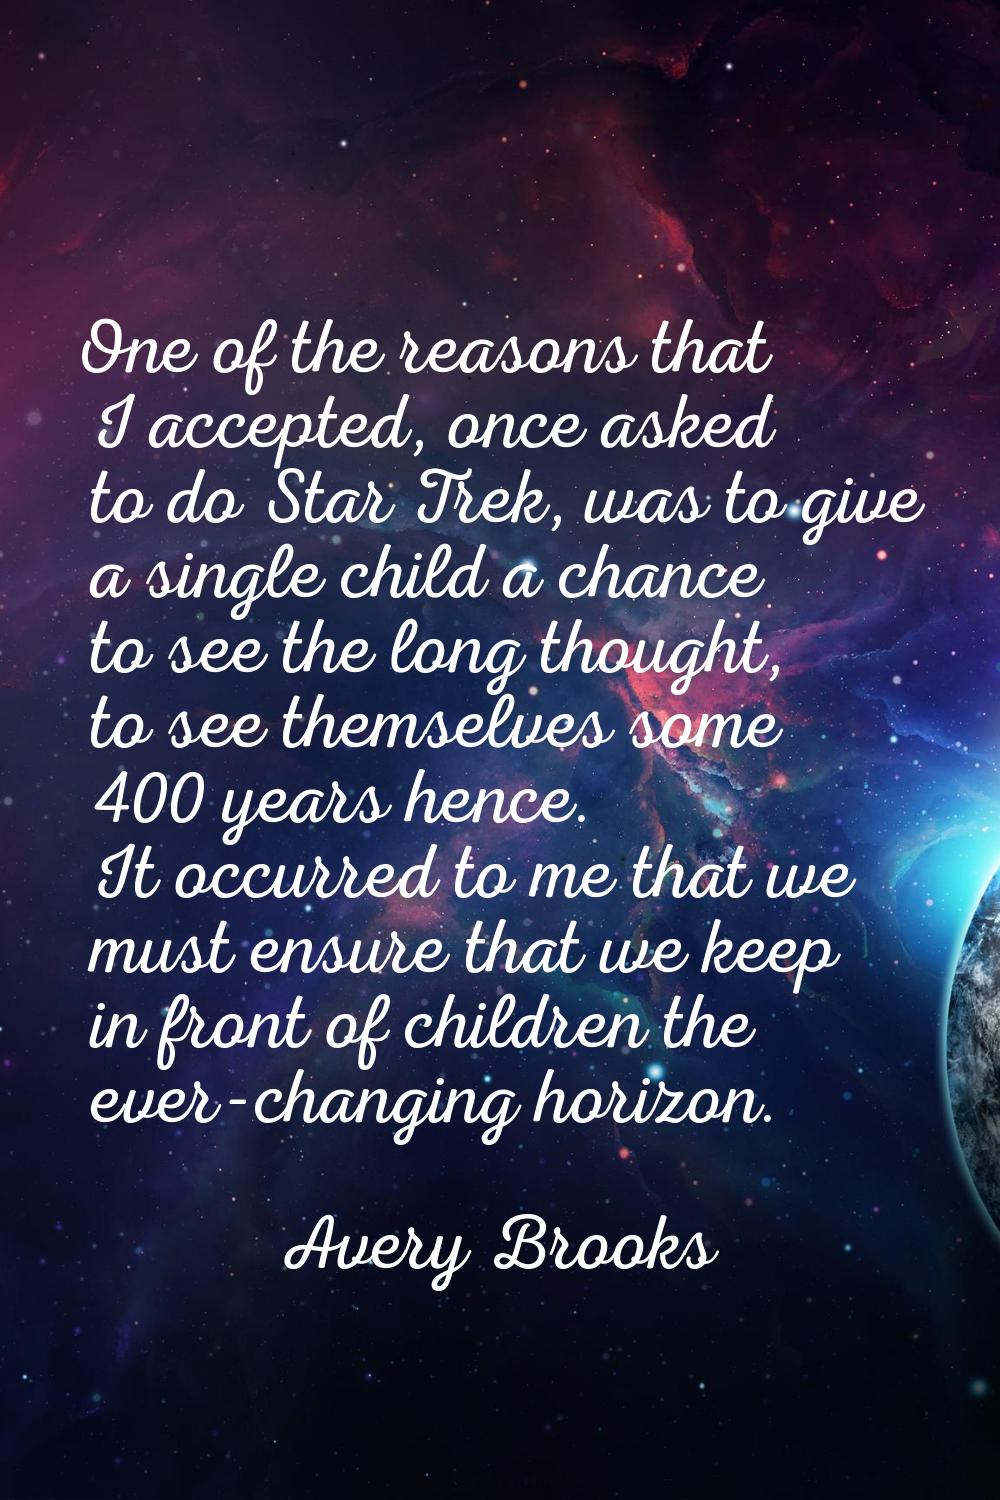 One of the reasons that I accepted, once asked to do Star Trek, was to give a single child a chance